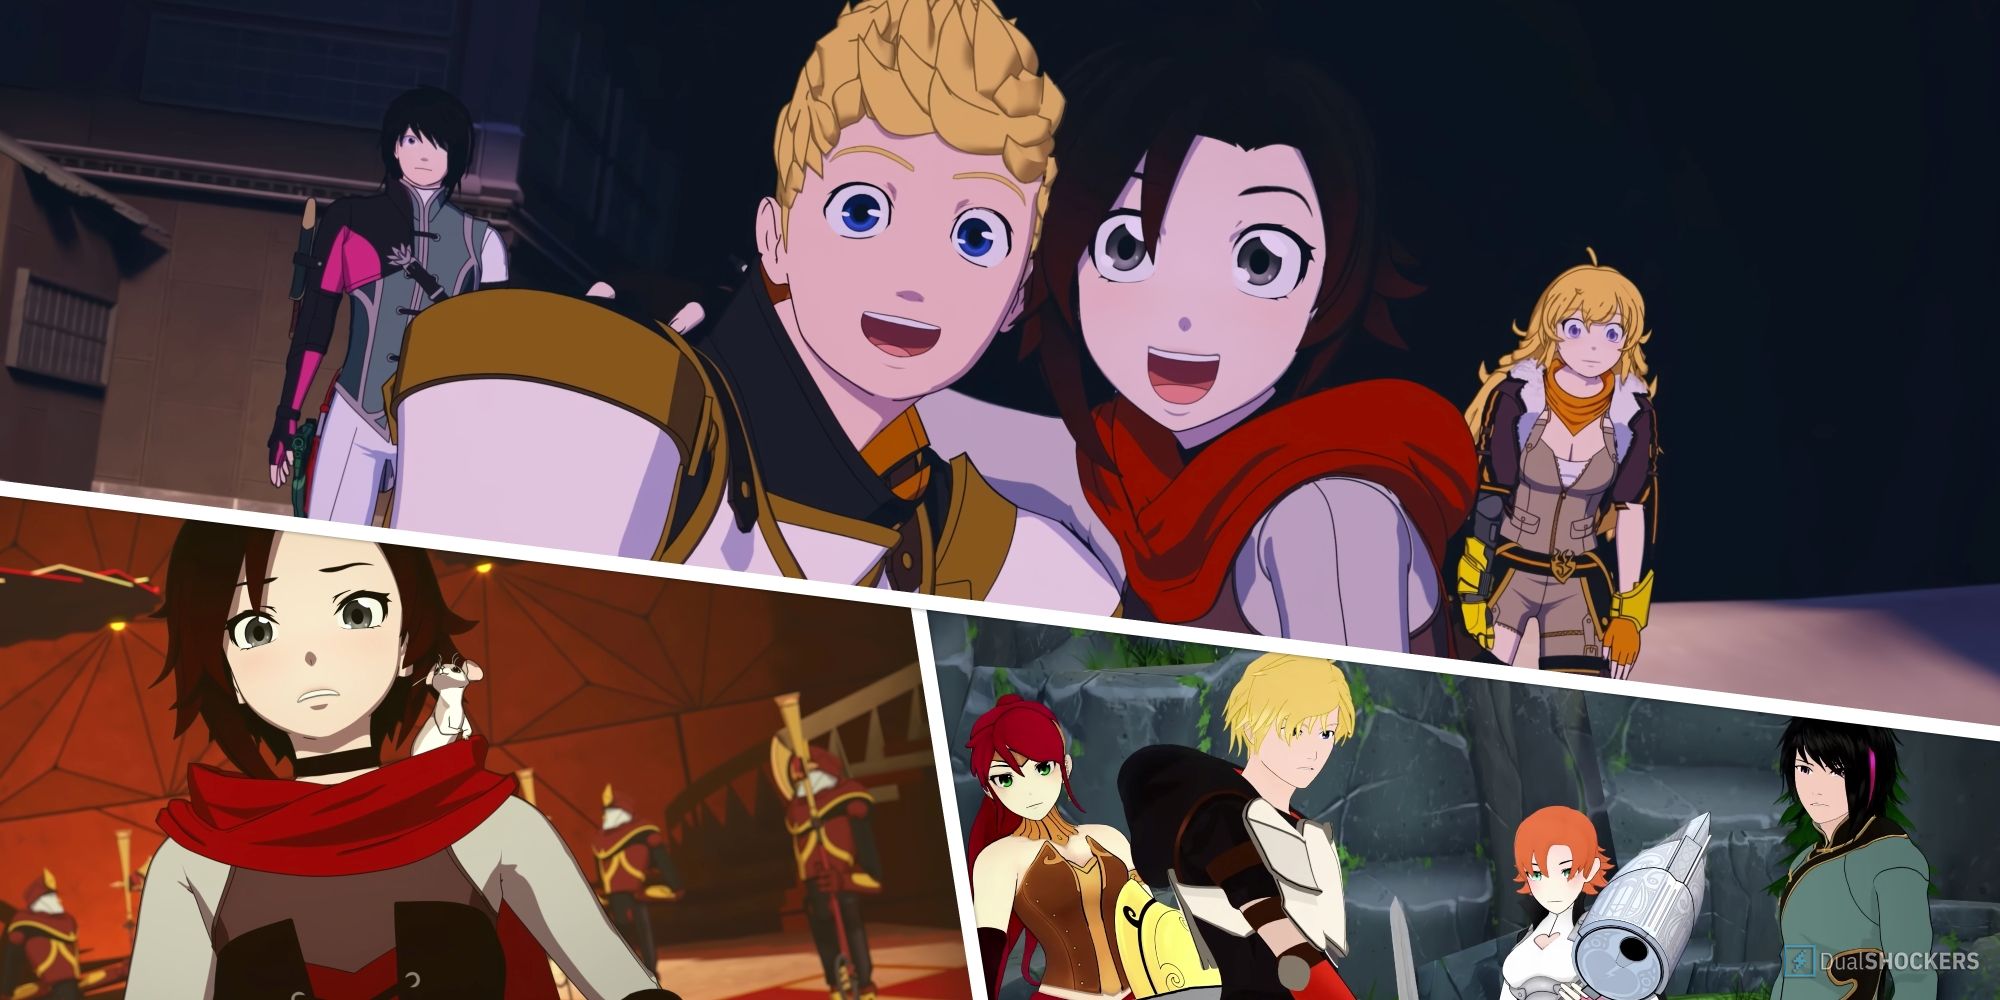 Collage of RWBY volumes 7, 3, and 9